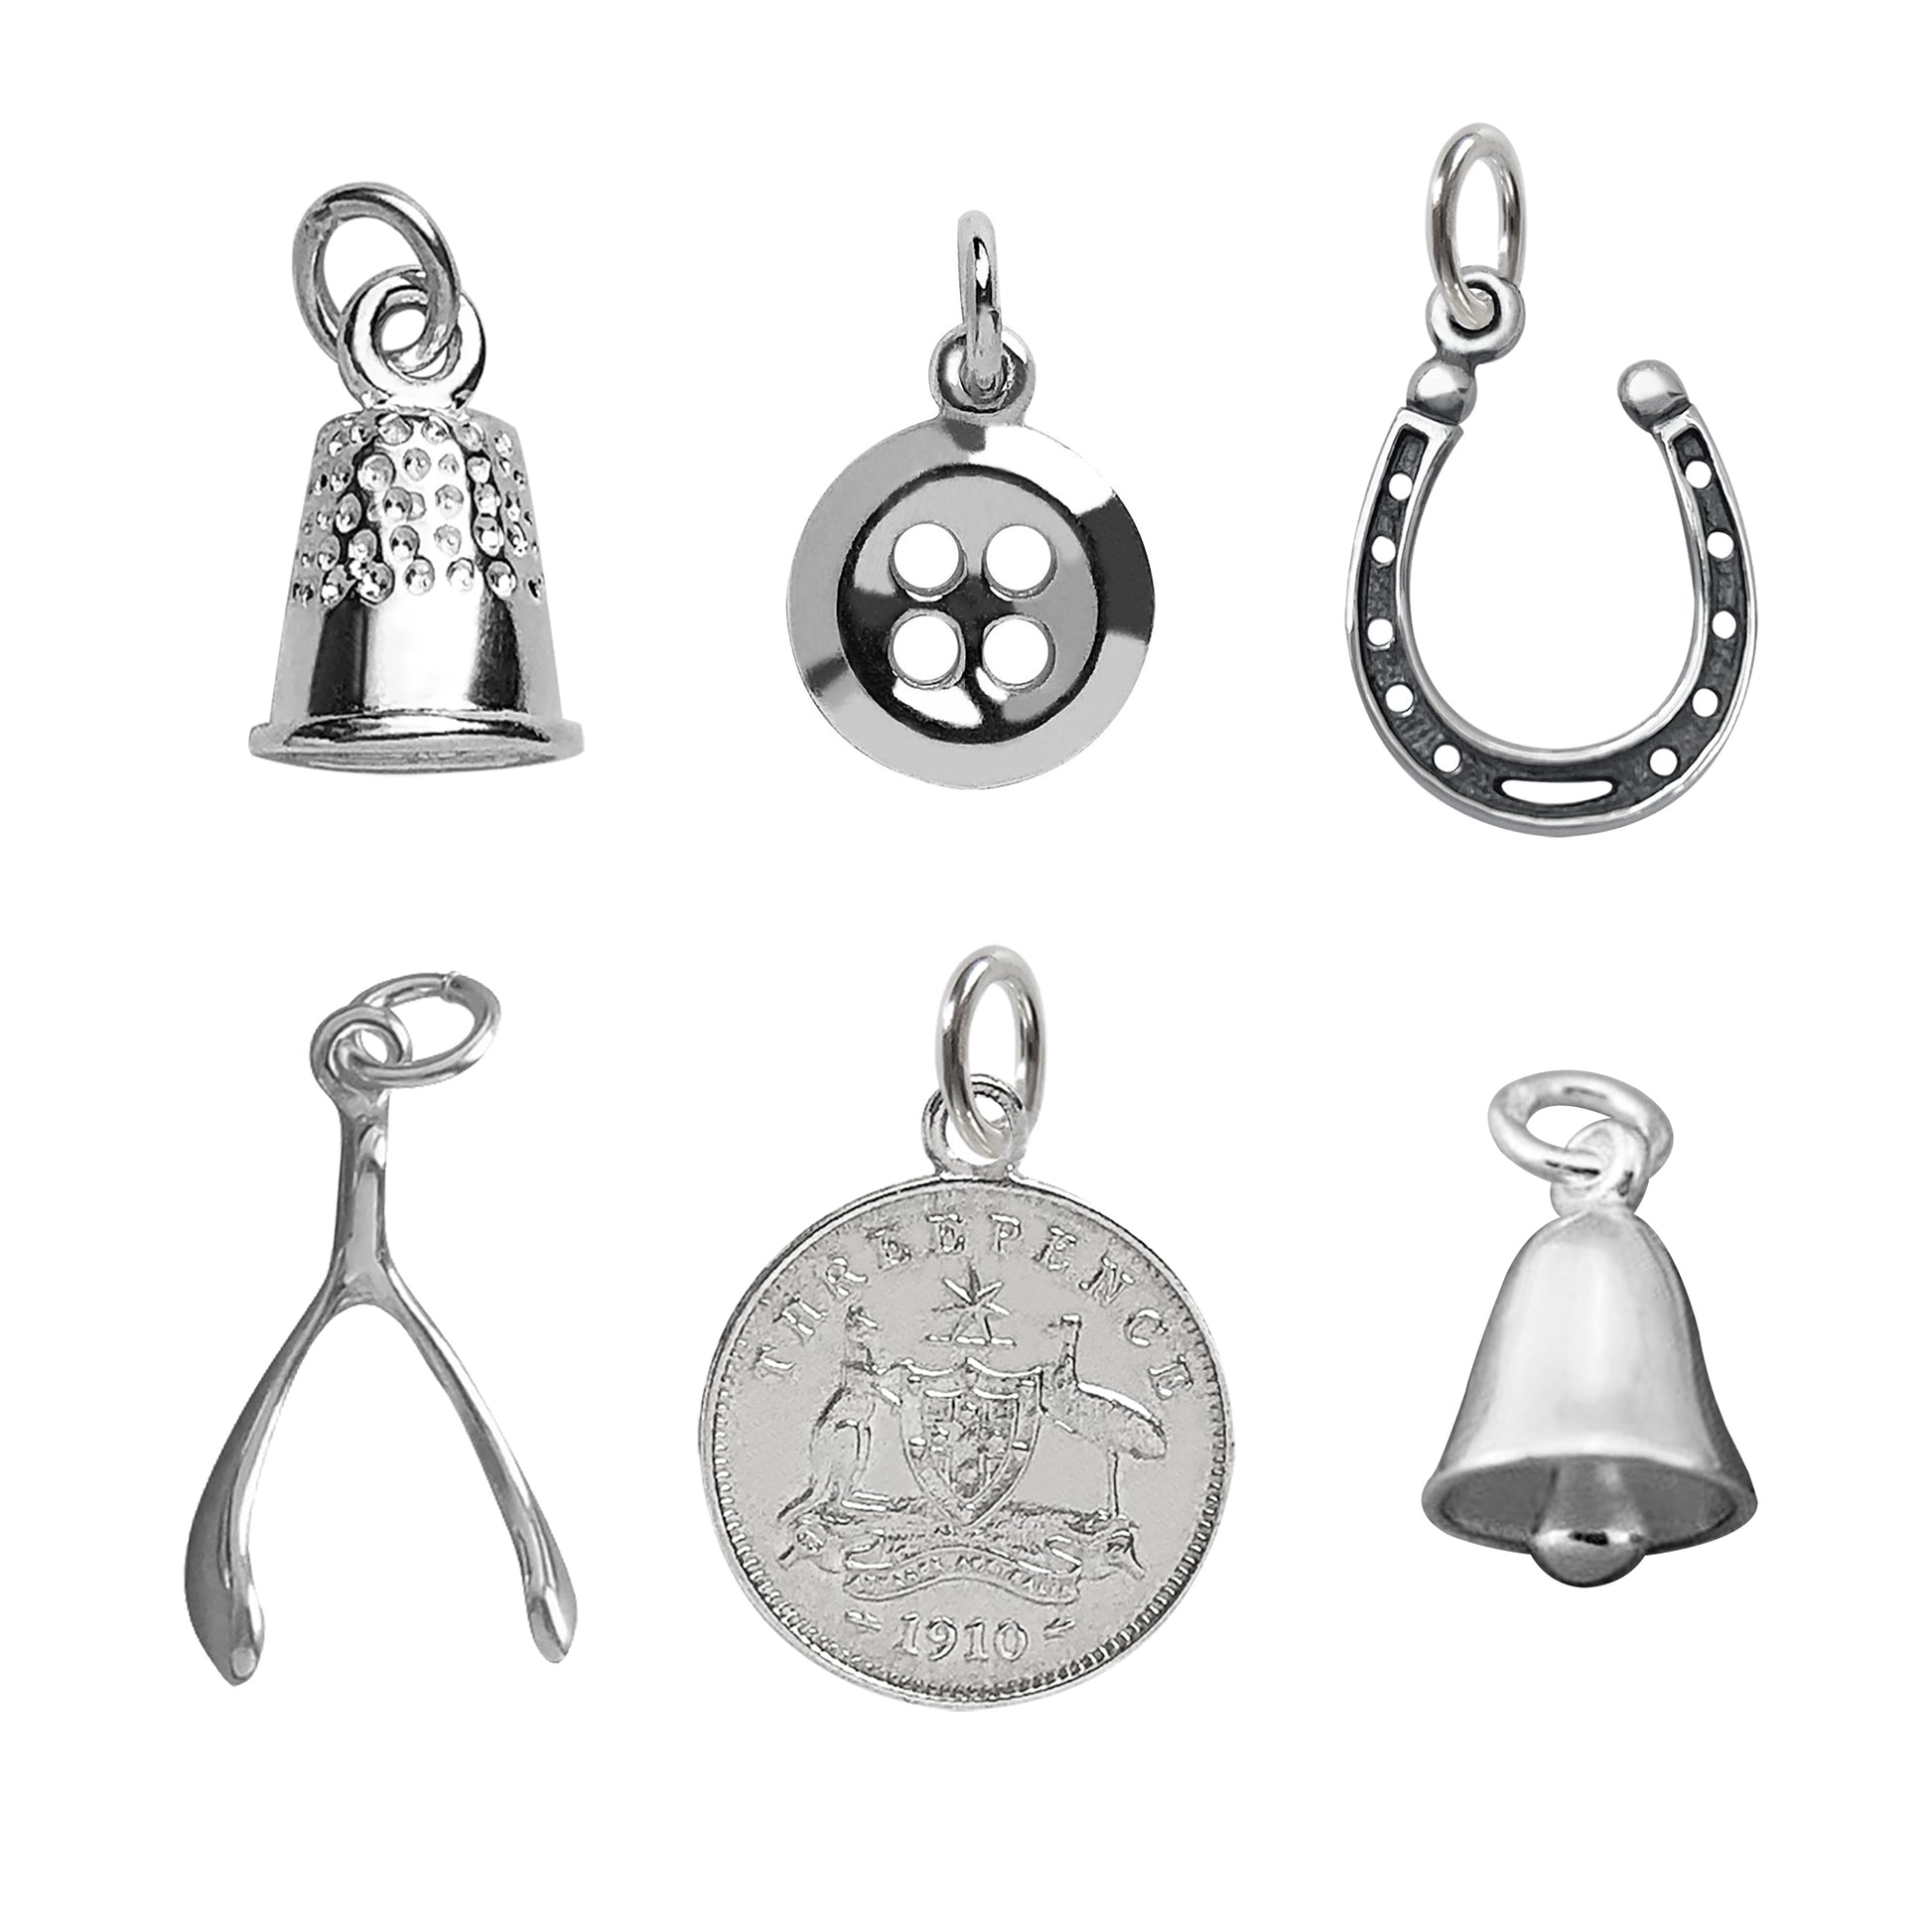 Traditional Christmas plum pudding charms sterling silver